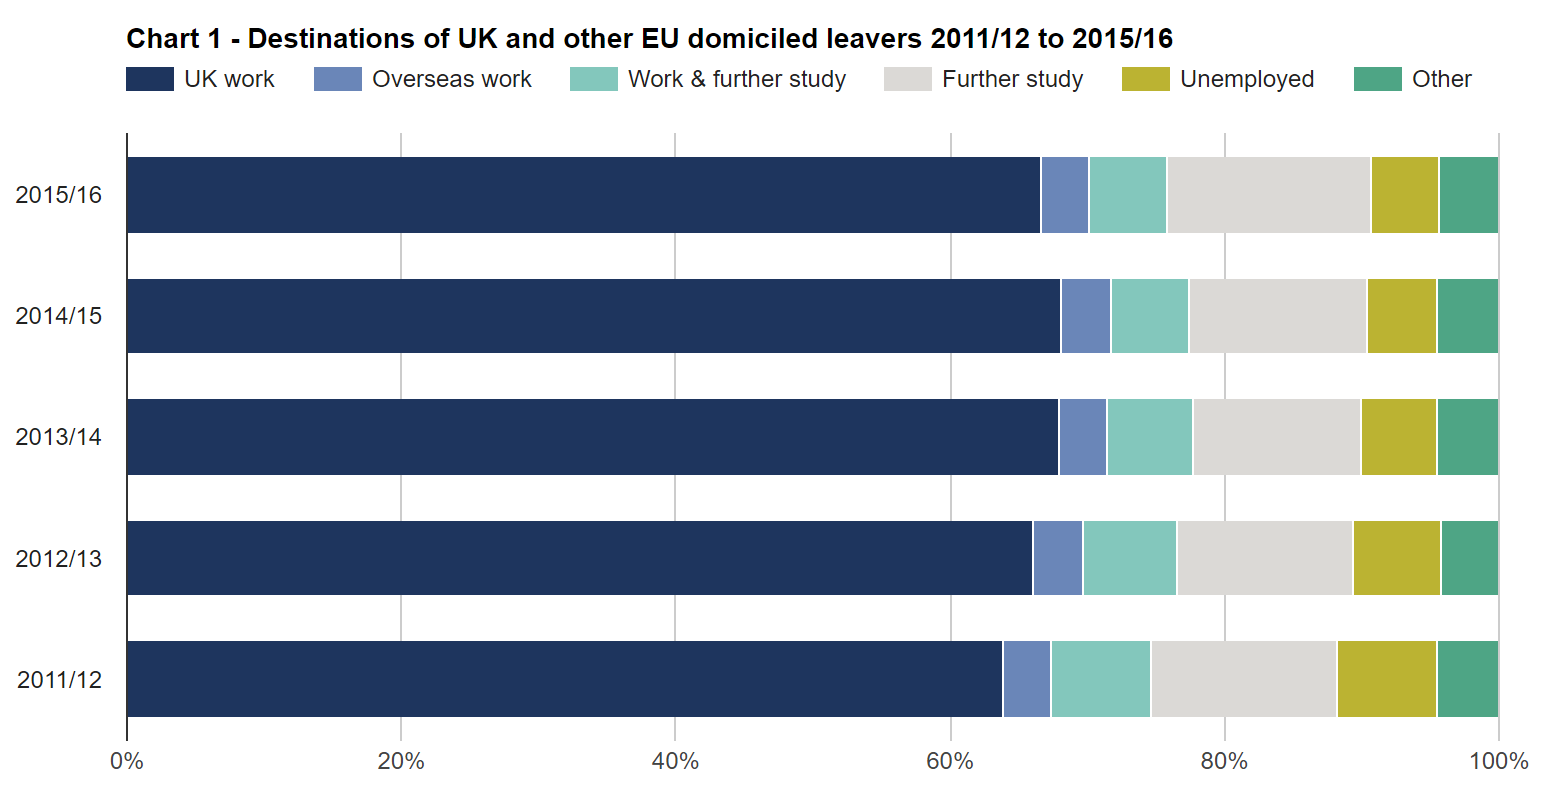 SFR245: Chart 1 - Destinations of UK and other EU domiciled leavers 2011/12 to 2015/16